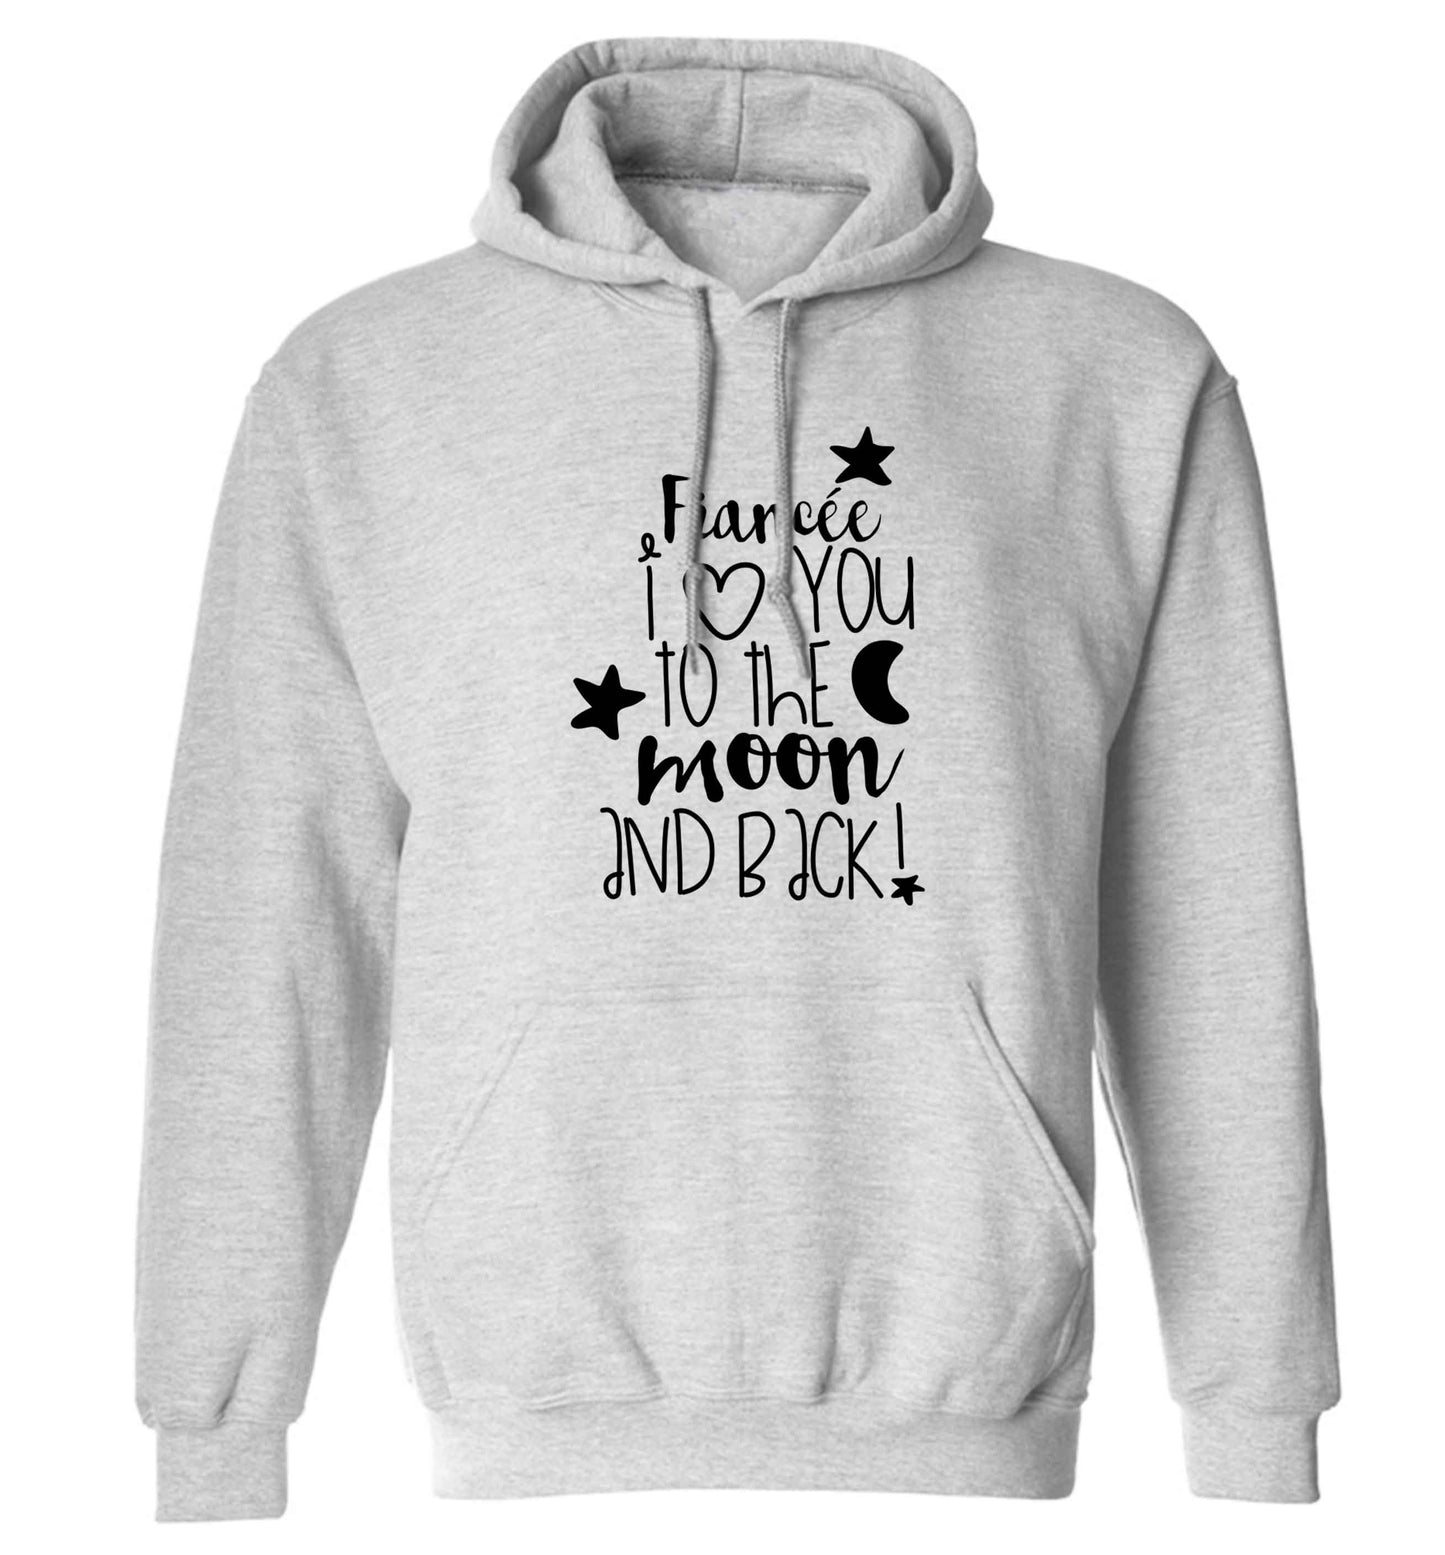 Fianc√©e I love you to the moon and back adults unisex grey hoodie 2XL